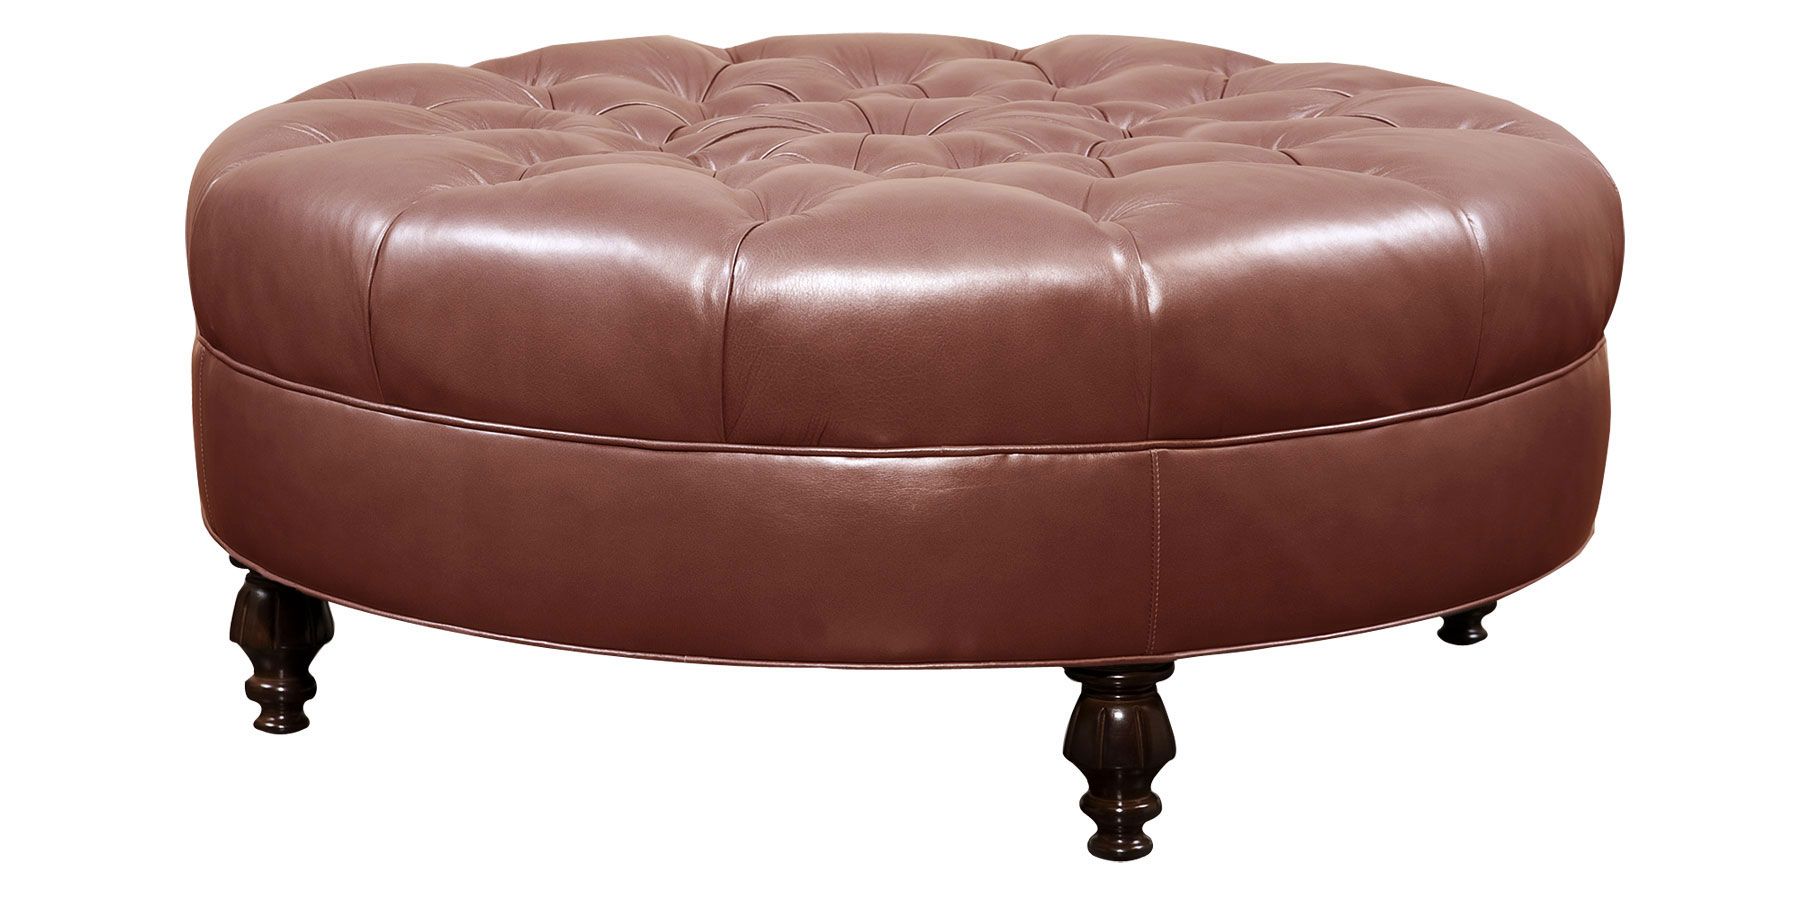 Ives Fabric Or Leather Large Round Tufted Ottomanleather Ottomans Coffee Table (View 3 of 8)